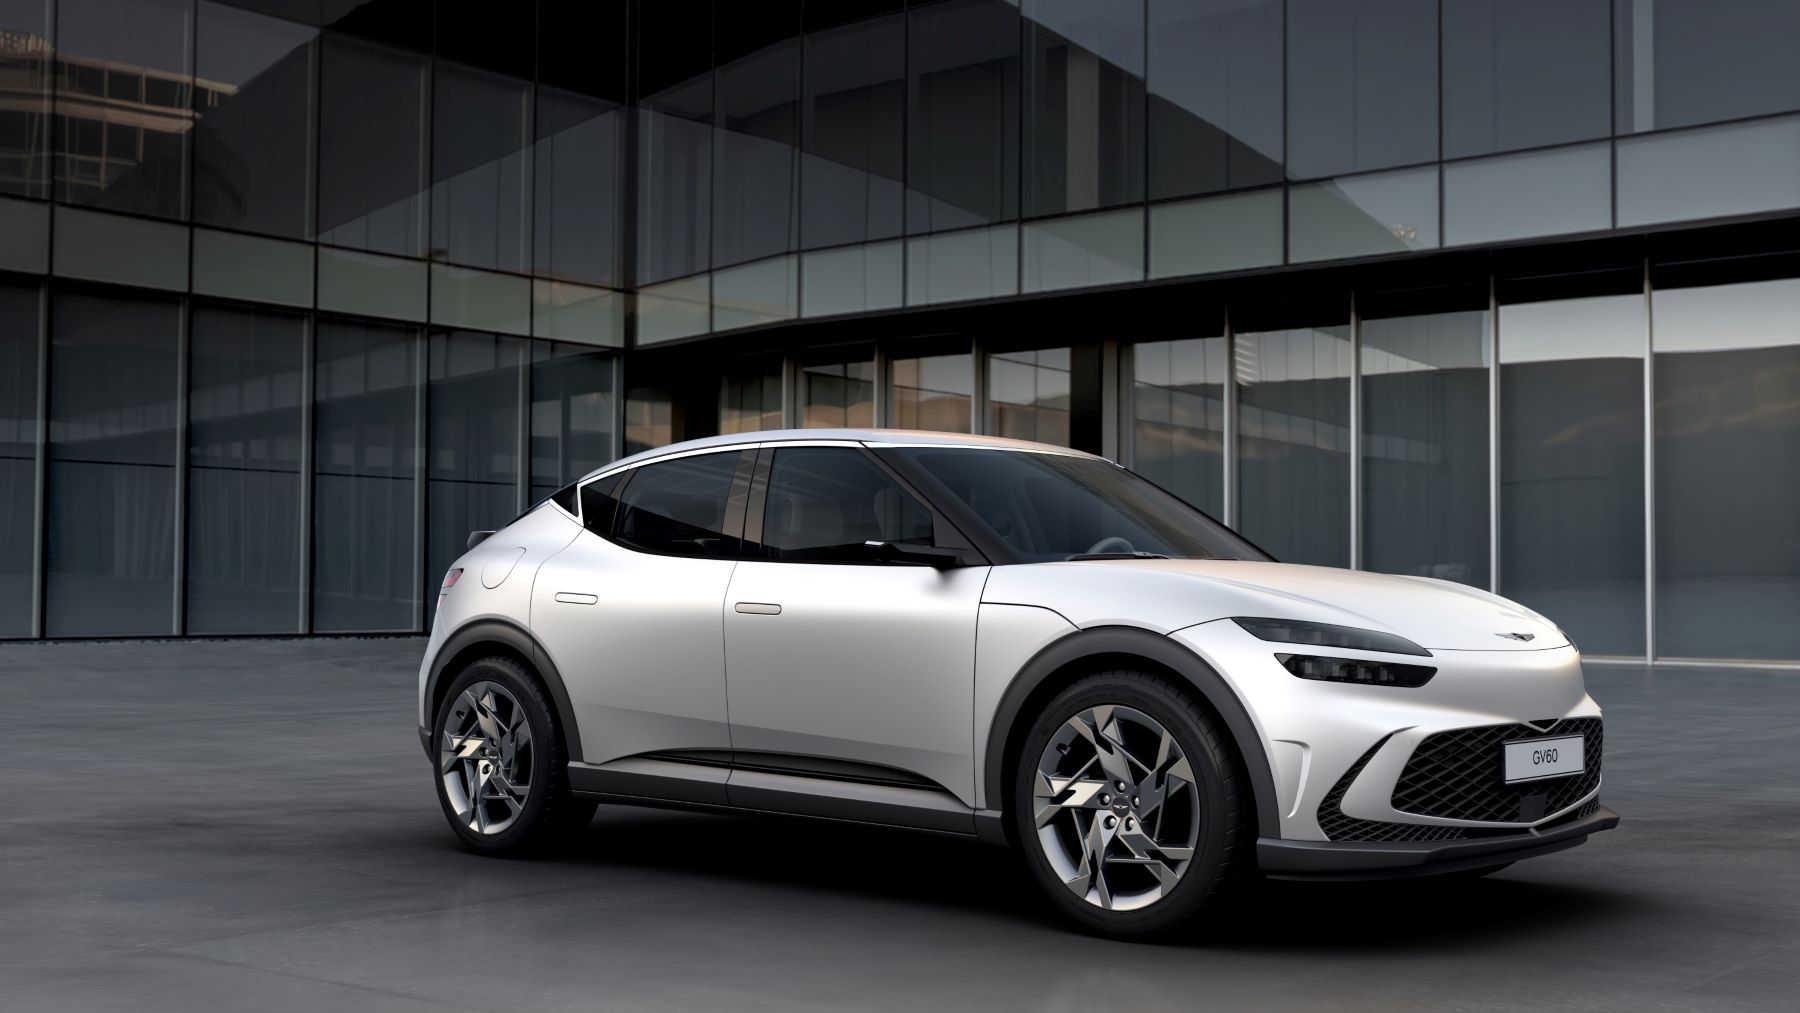 The Genesis GV60 luxury electric compact SUV parked outside a glass office building